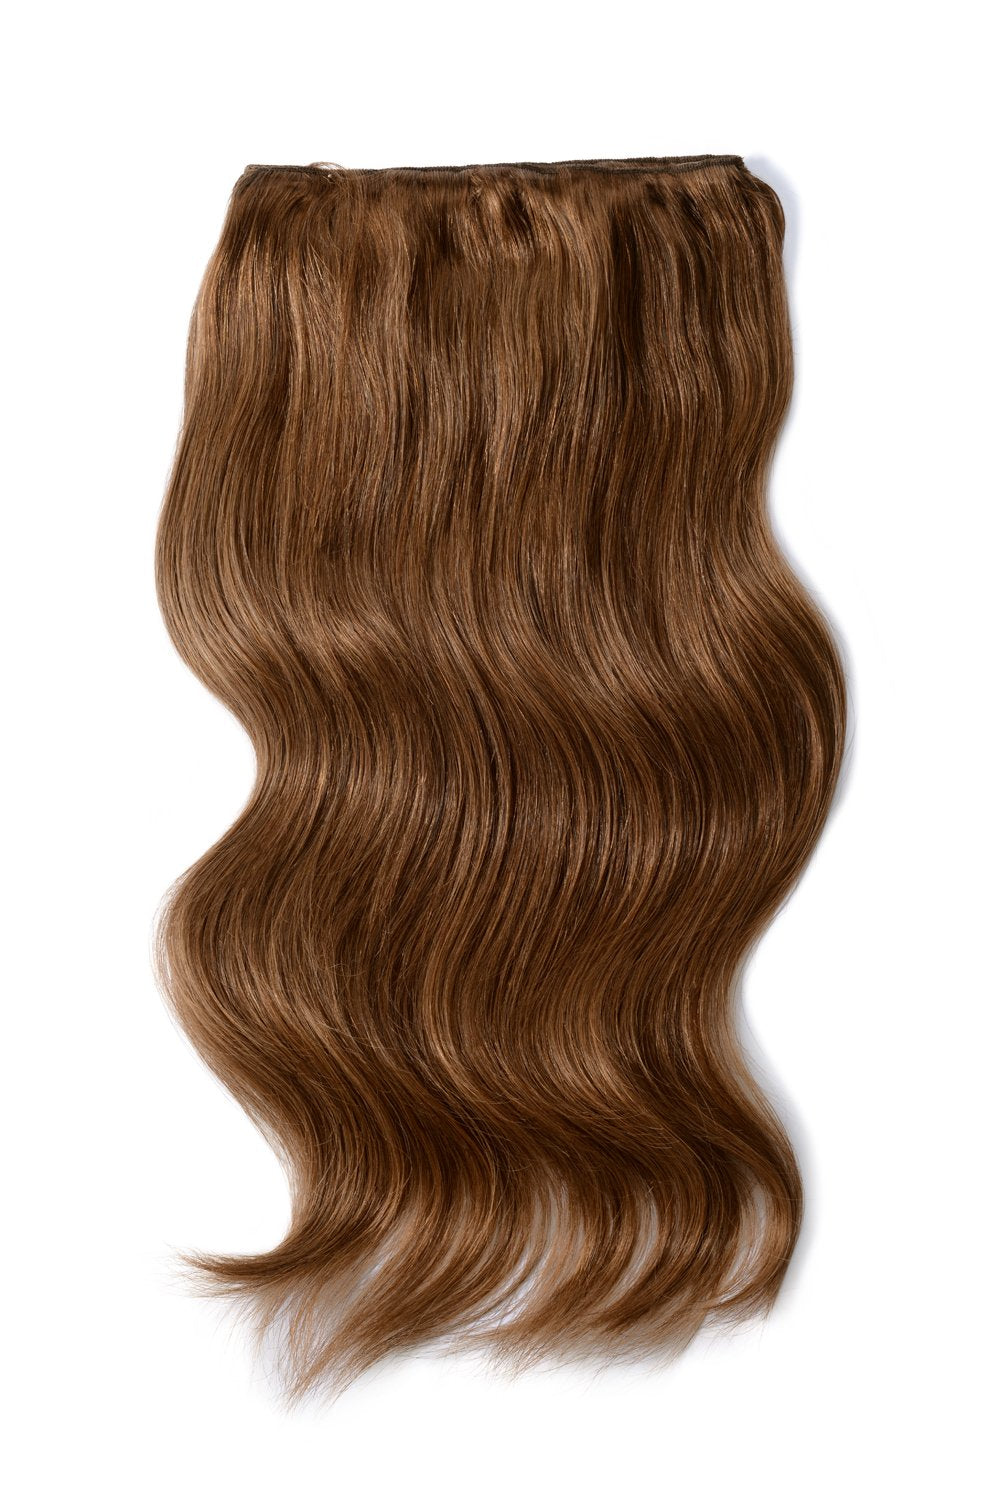 Double Wefted Full Head Remy Clip in Human Hair Extensions - Toffee Brown (#5)